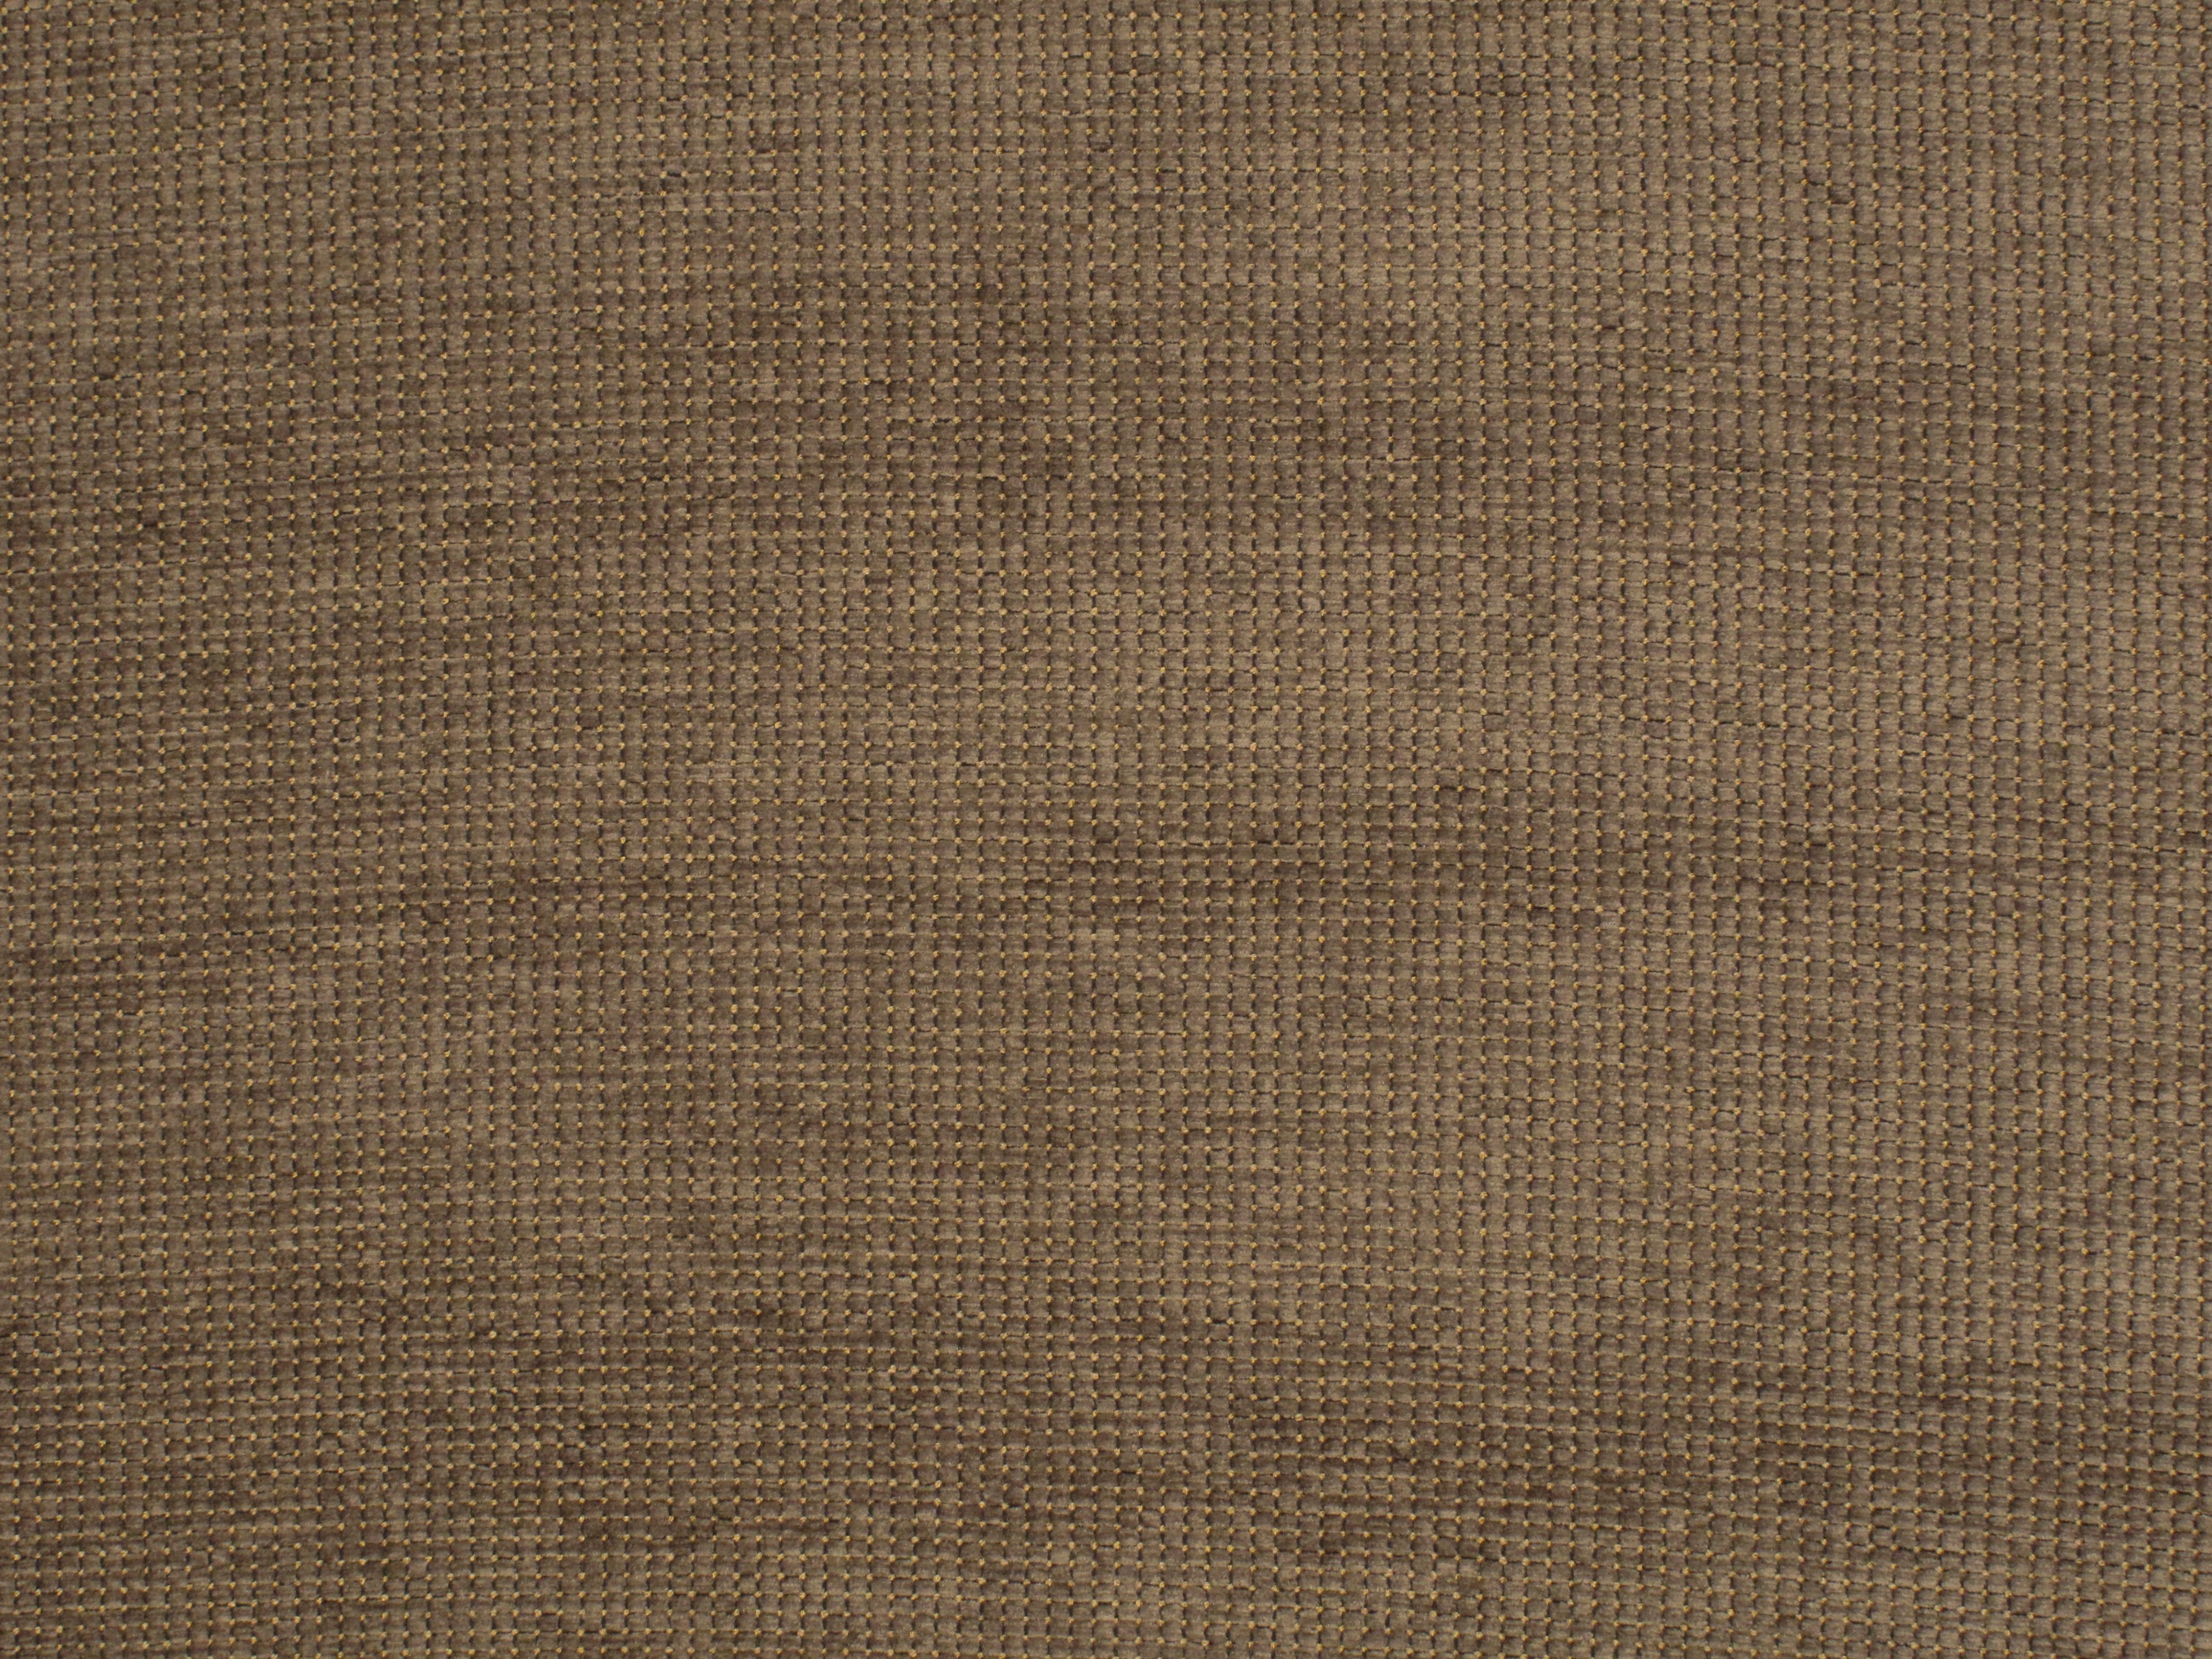 Cubic fabric in stone color - pattern number PW 00090093 - by Scalamandre in the Old World Weavers collection